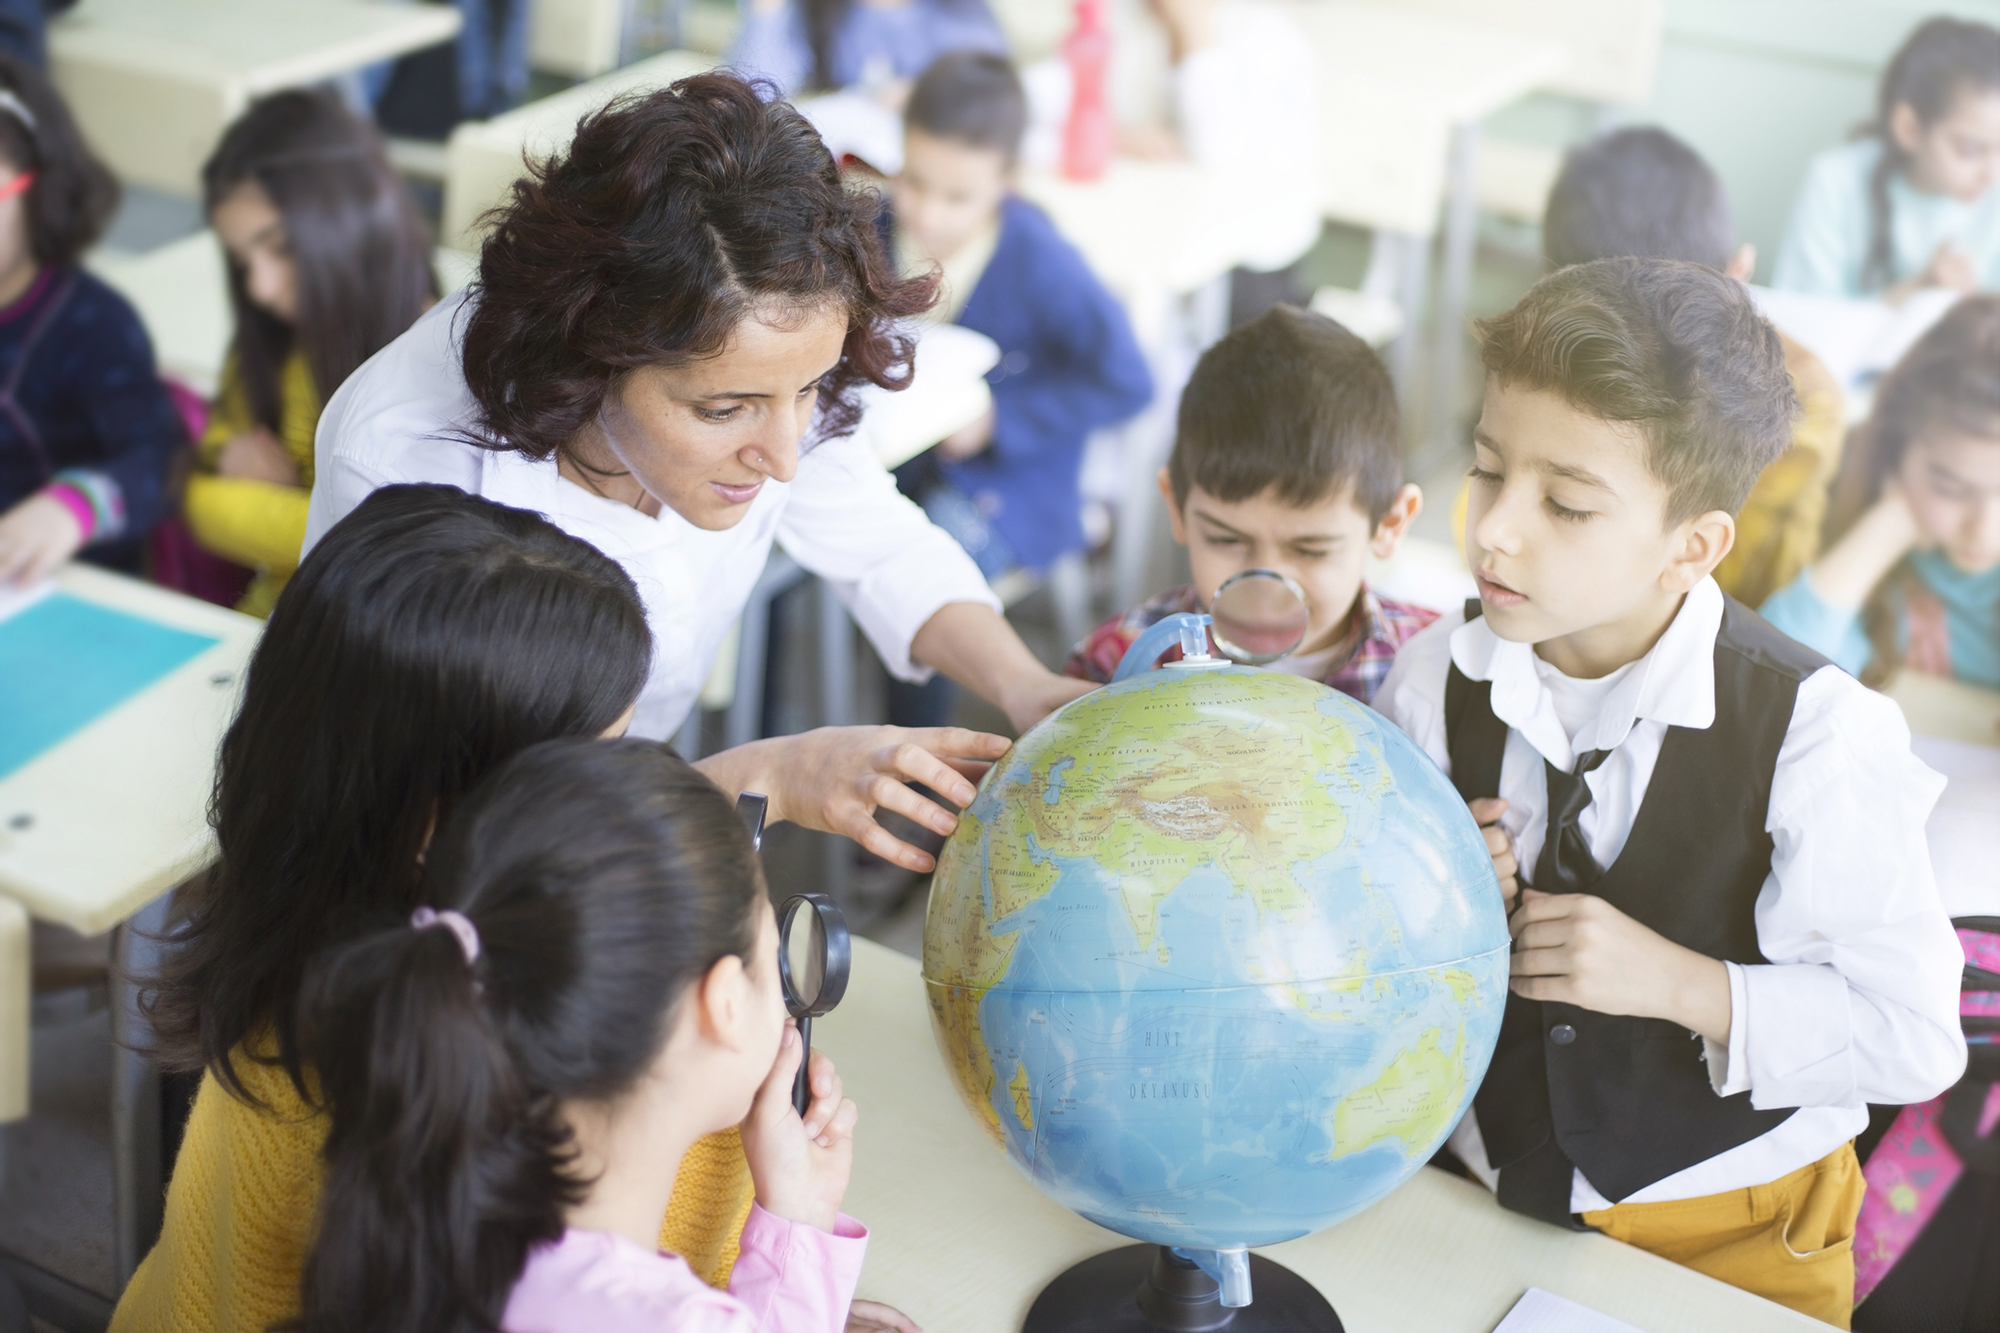 A teacher in a classroom with young children looking closely at a globe on a desk.